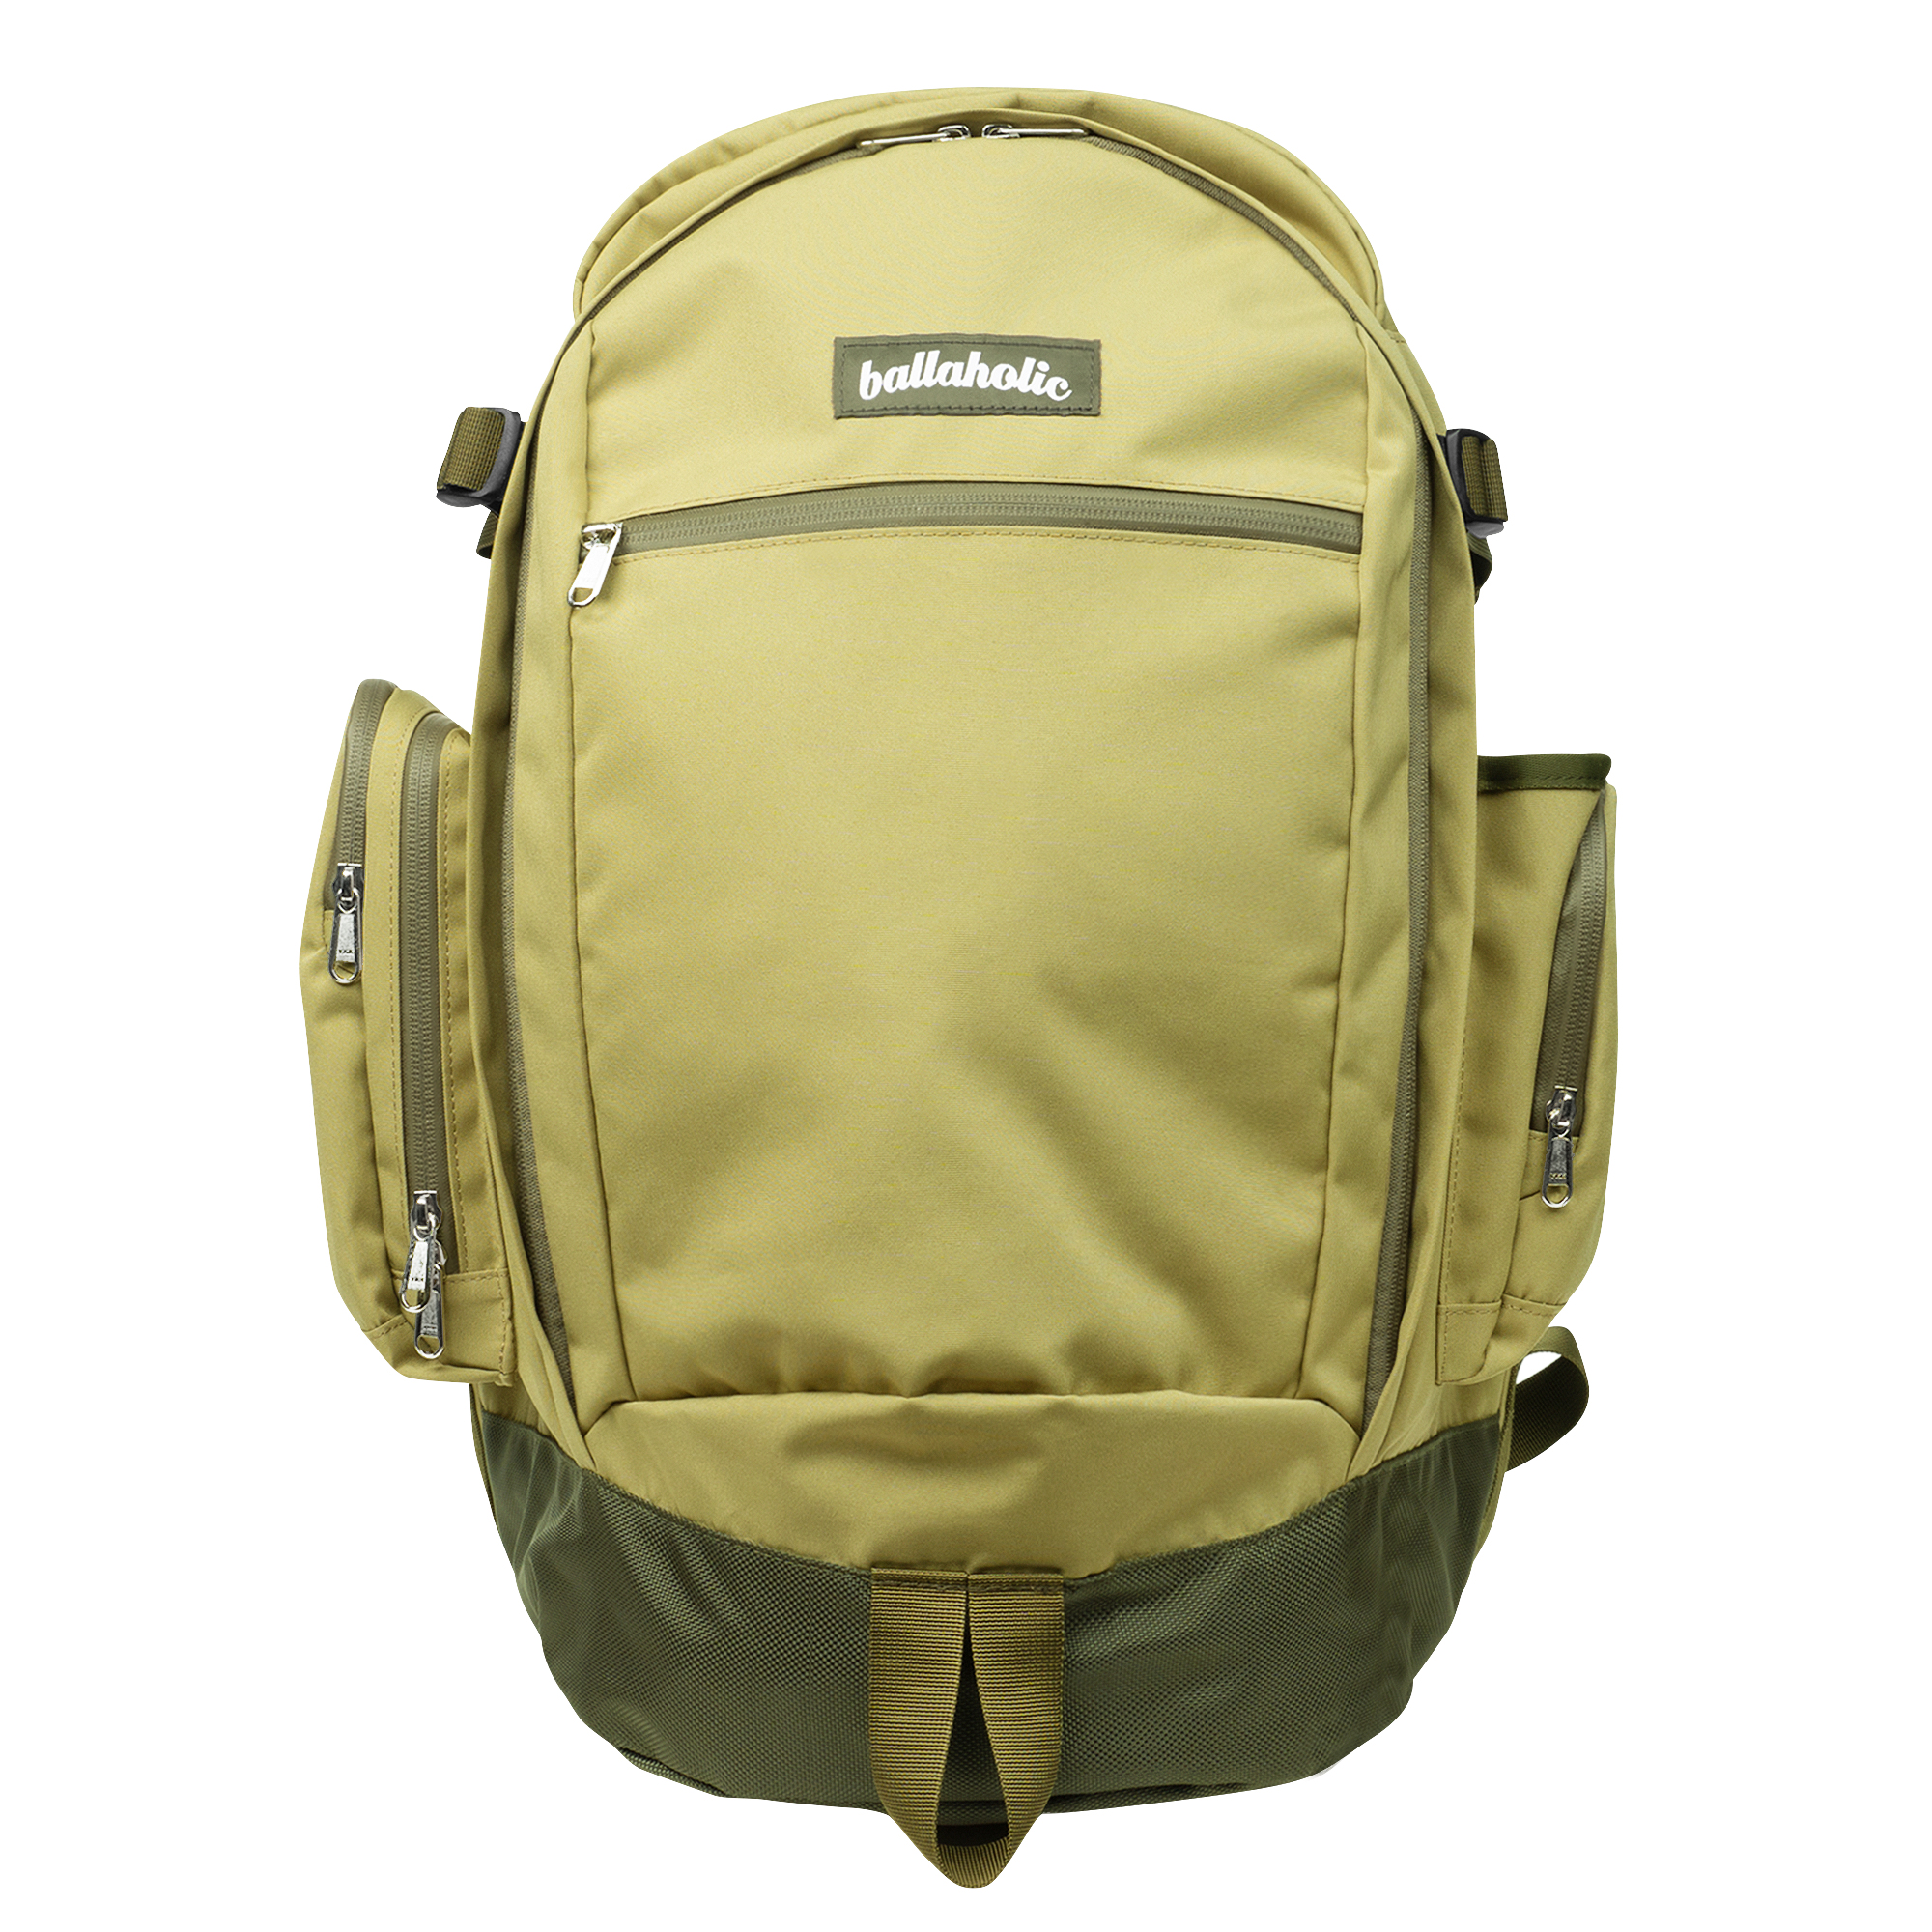 ballaholic Ball On Journey Backpack リュック